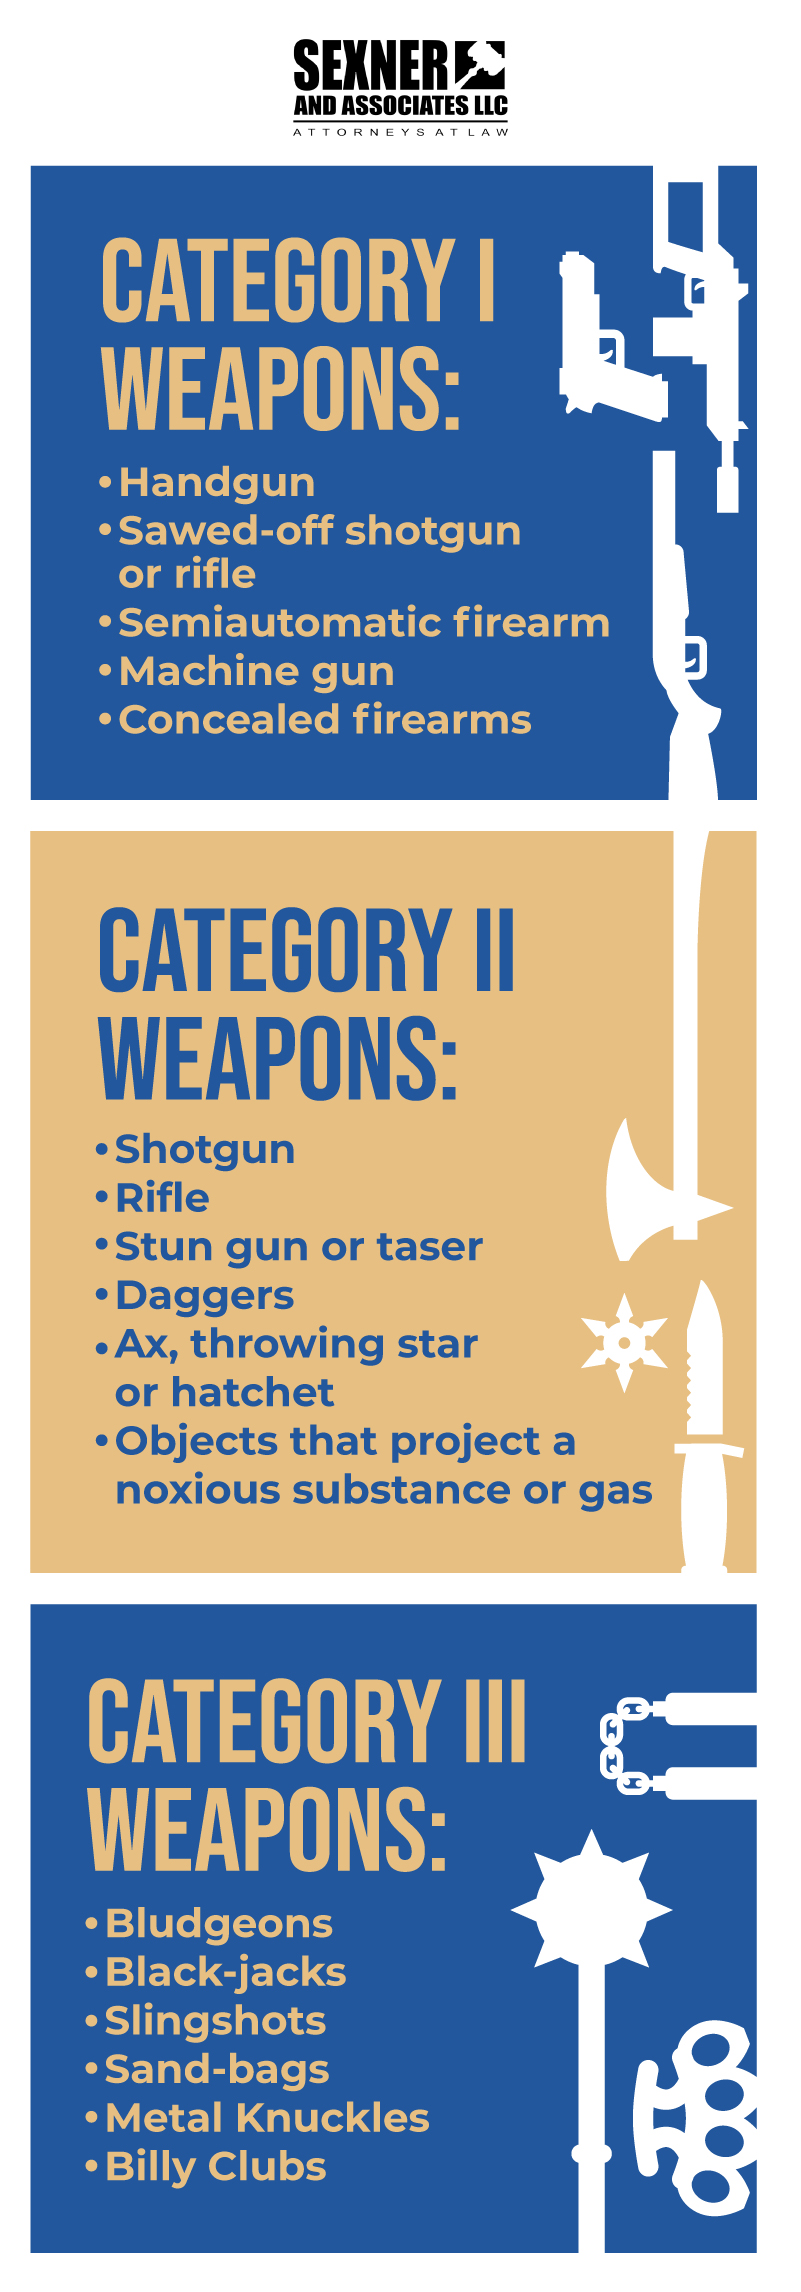 weapon categories listed